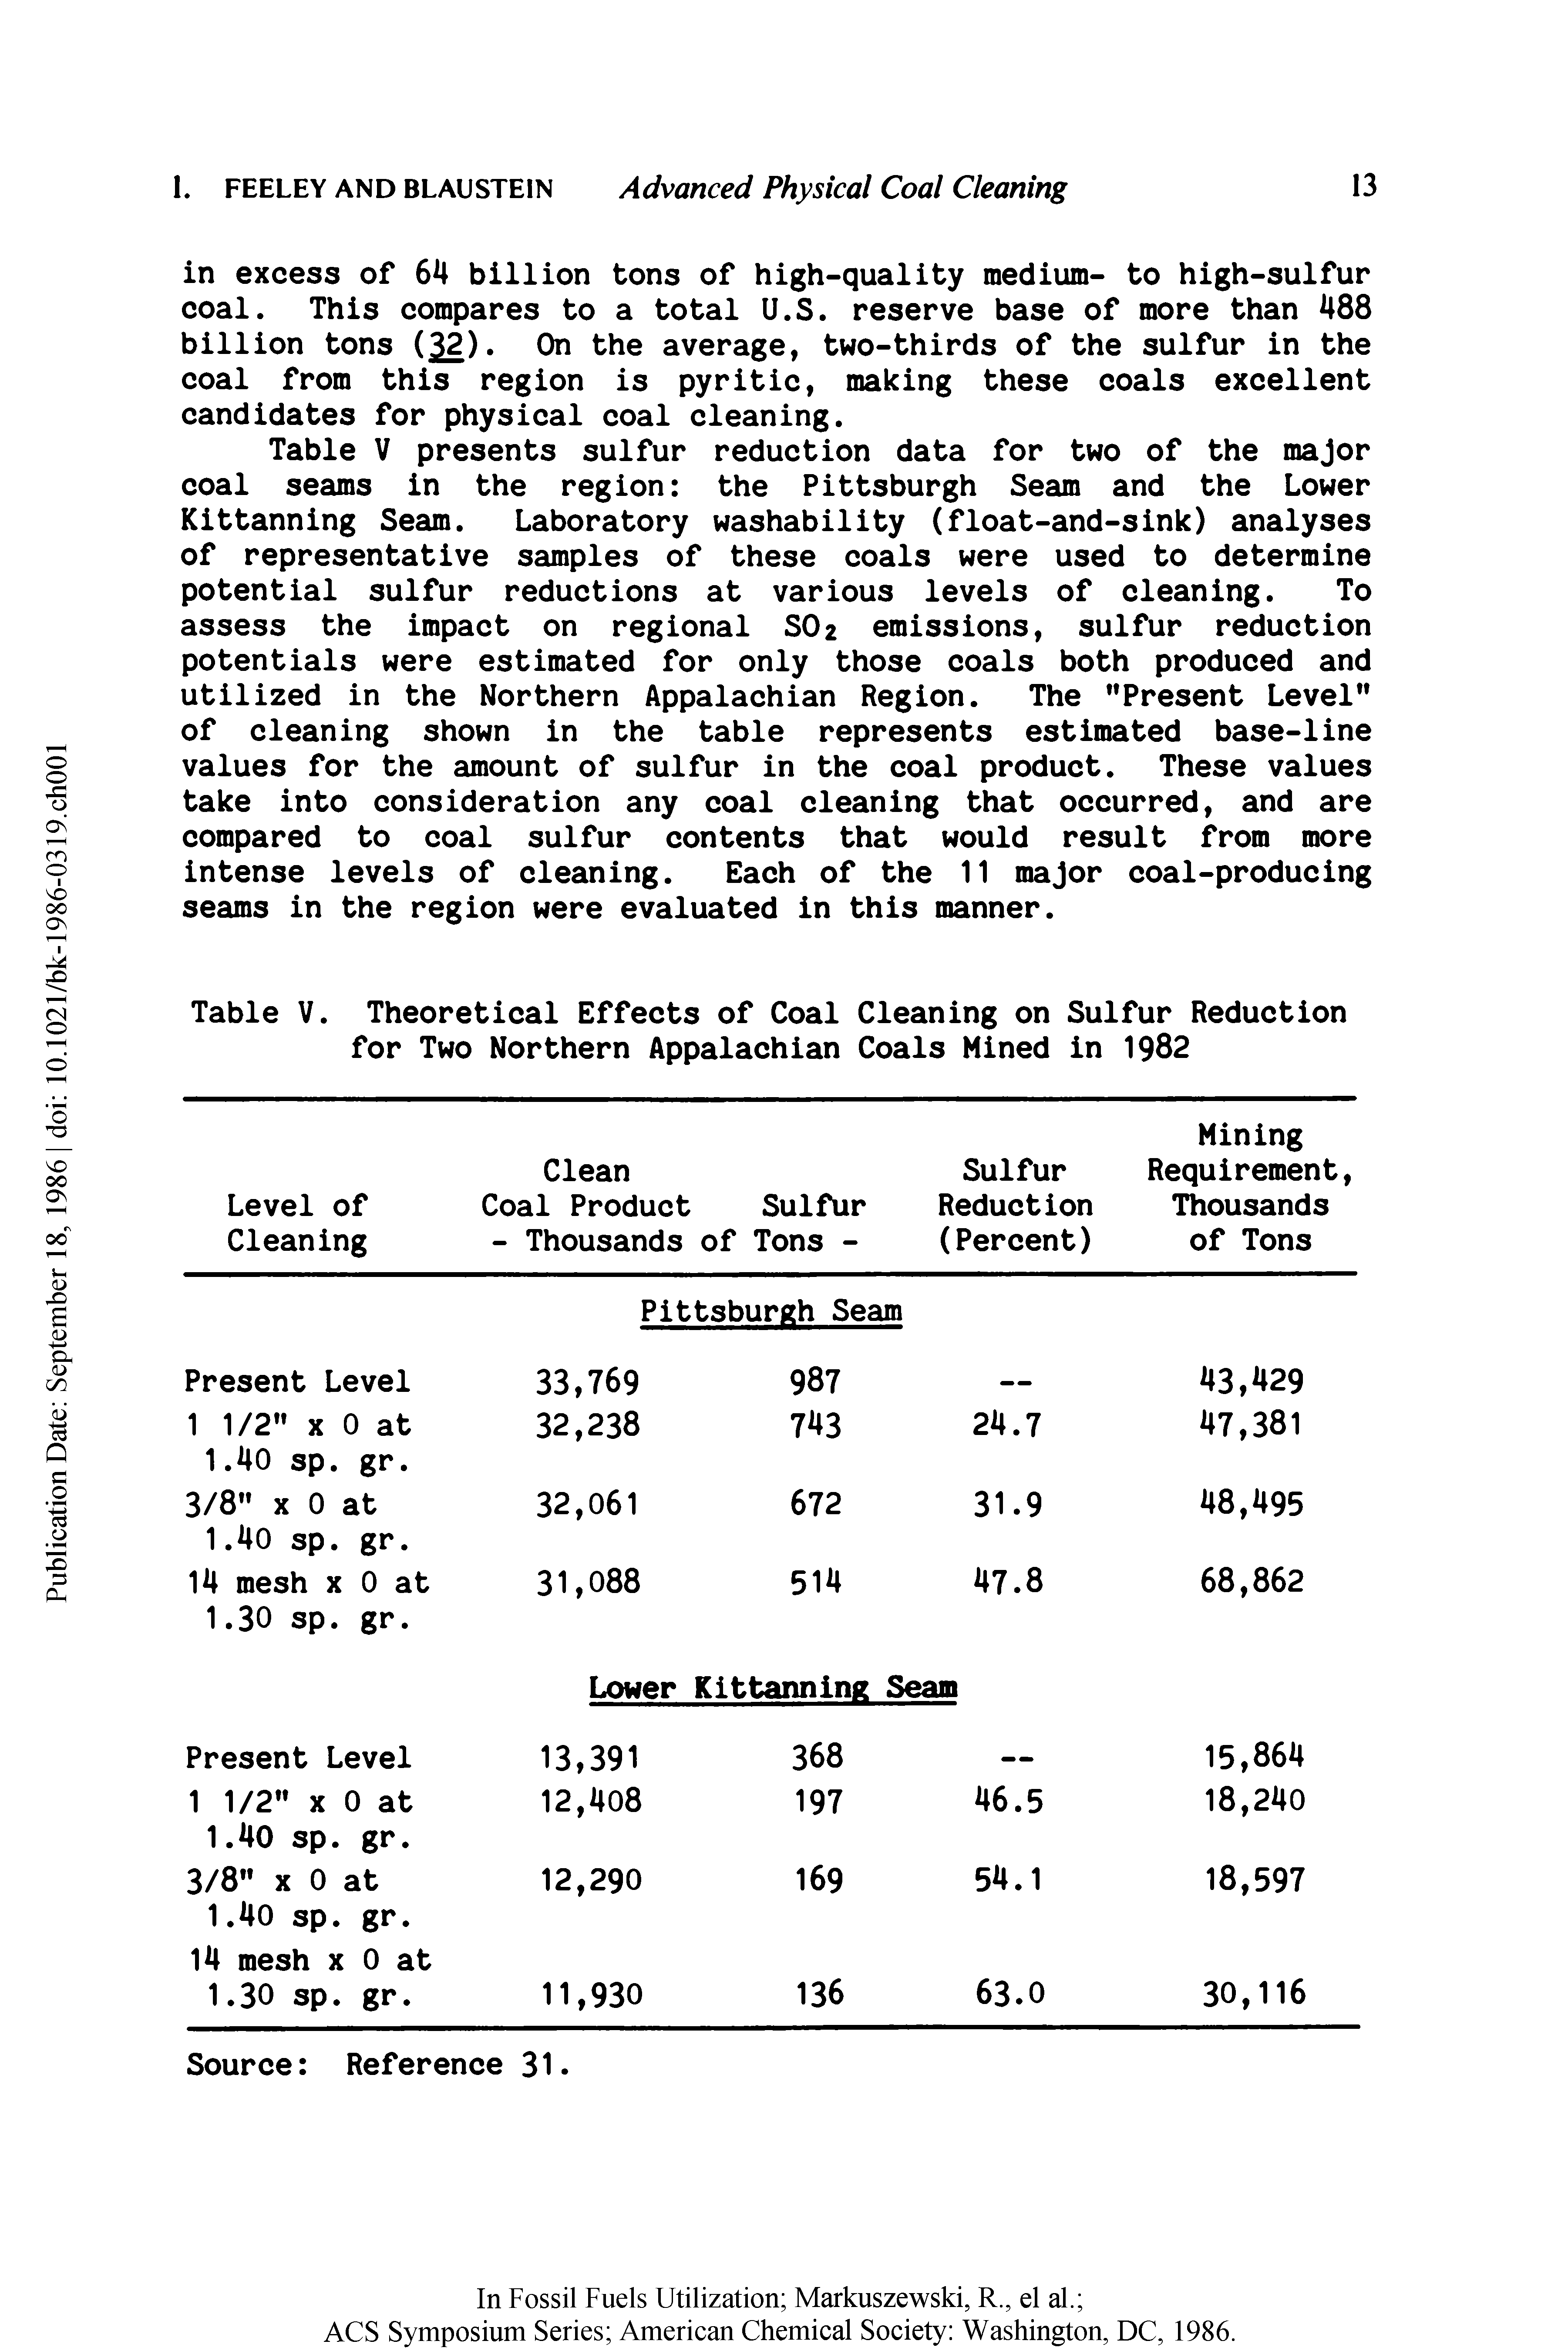 Table V. Theoretical Effects of Coal Cleaning on Sulfur Reduction for Two Northern Appalachian Coals Mined in 1982...